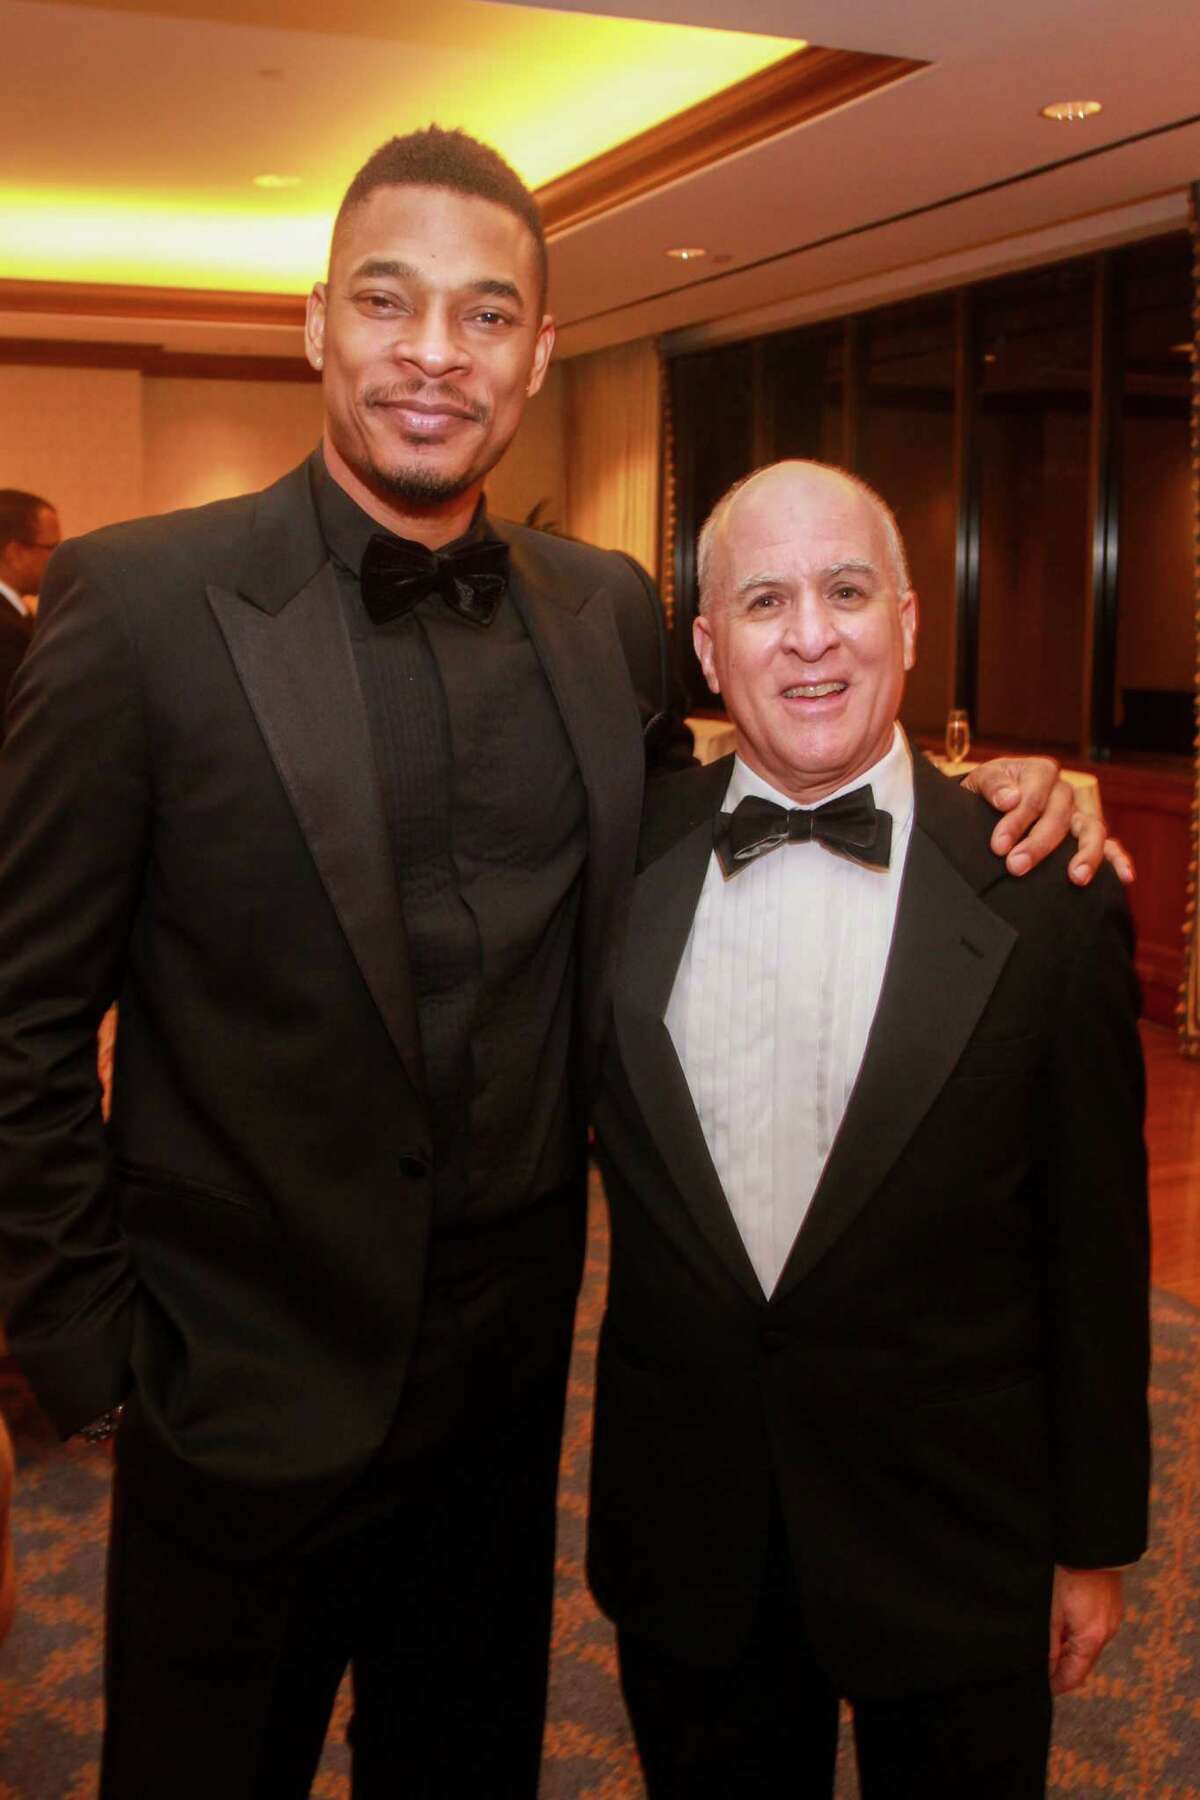 Terrance Hayes, left, and Rich Levy at the Inprint Poets & Writers Ball on February 8, 2020 in Houston at The Houstonian.